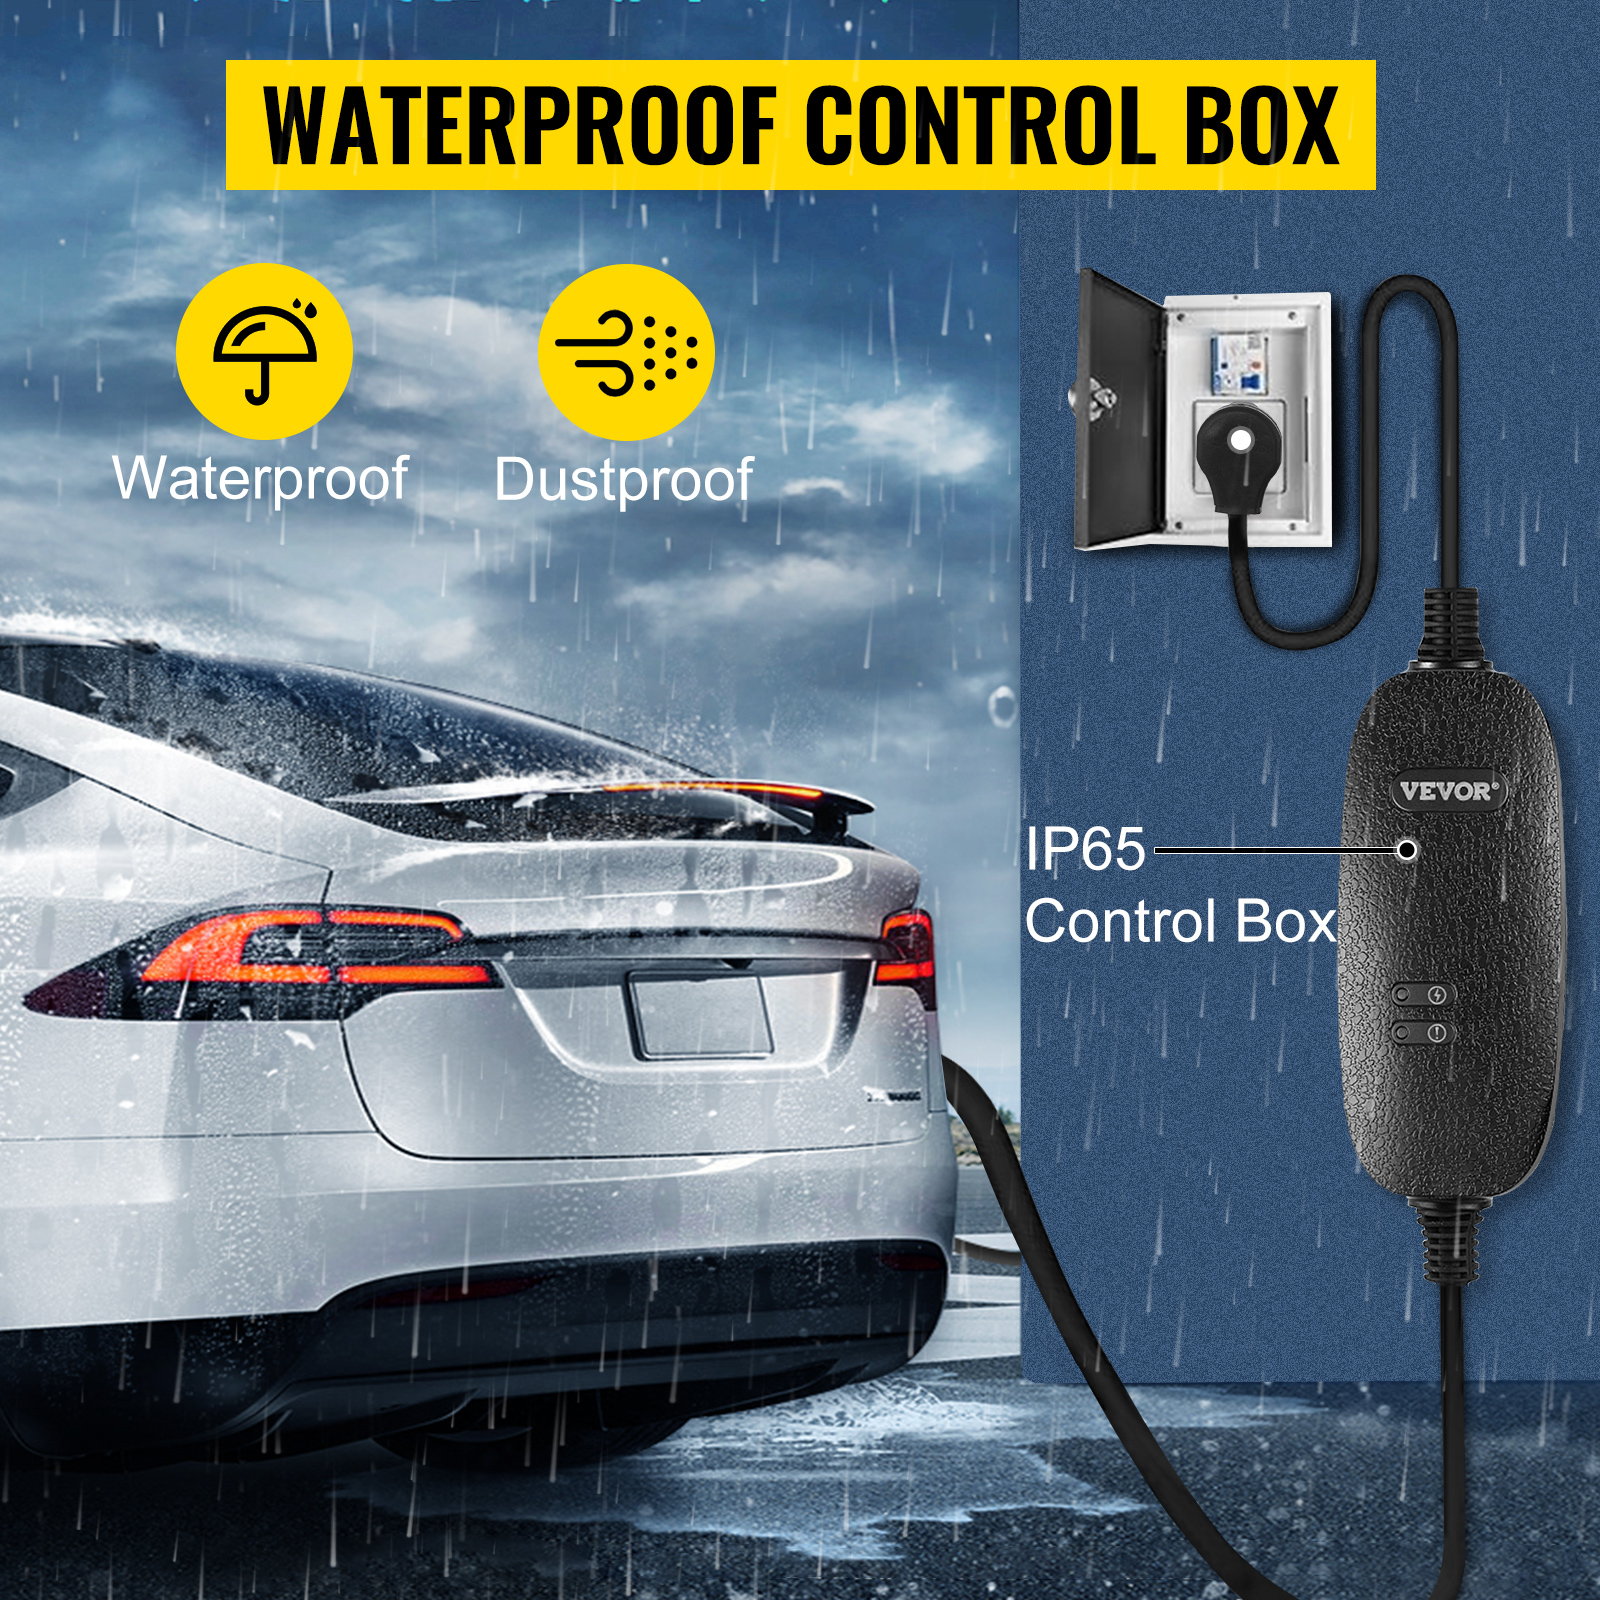 https://d2qc09rl1gfuof.cloudfront.net/product/CDQFMC16AACLEVKNS/ev-charger-m100-5.jpg